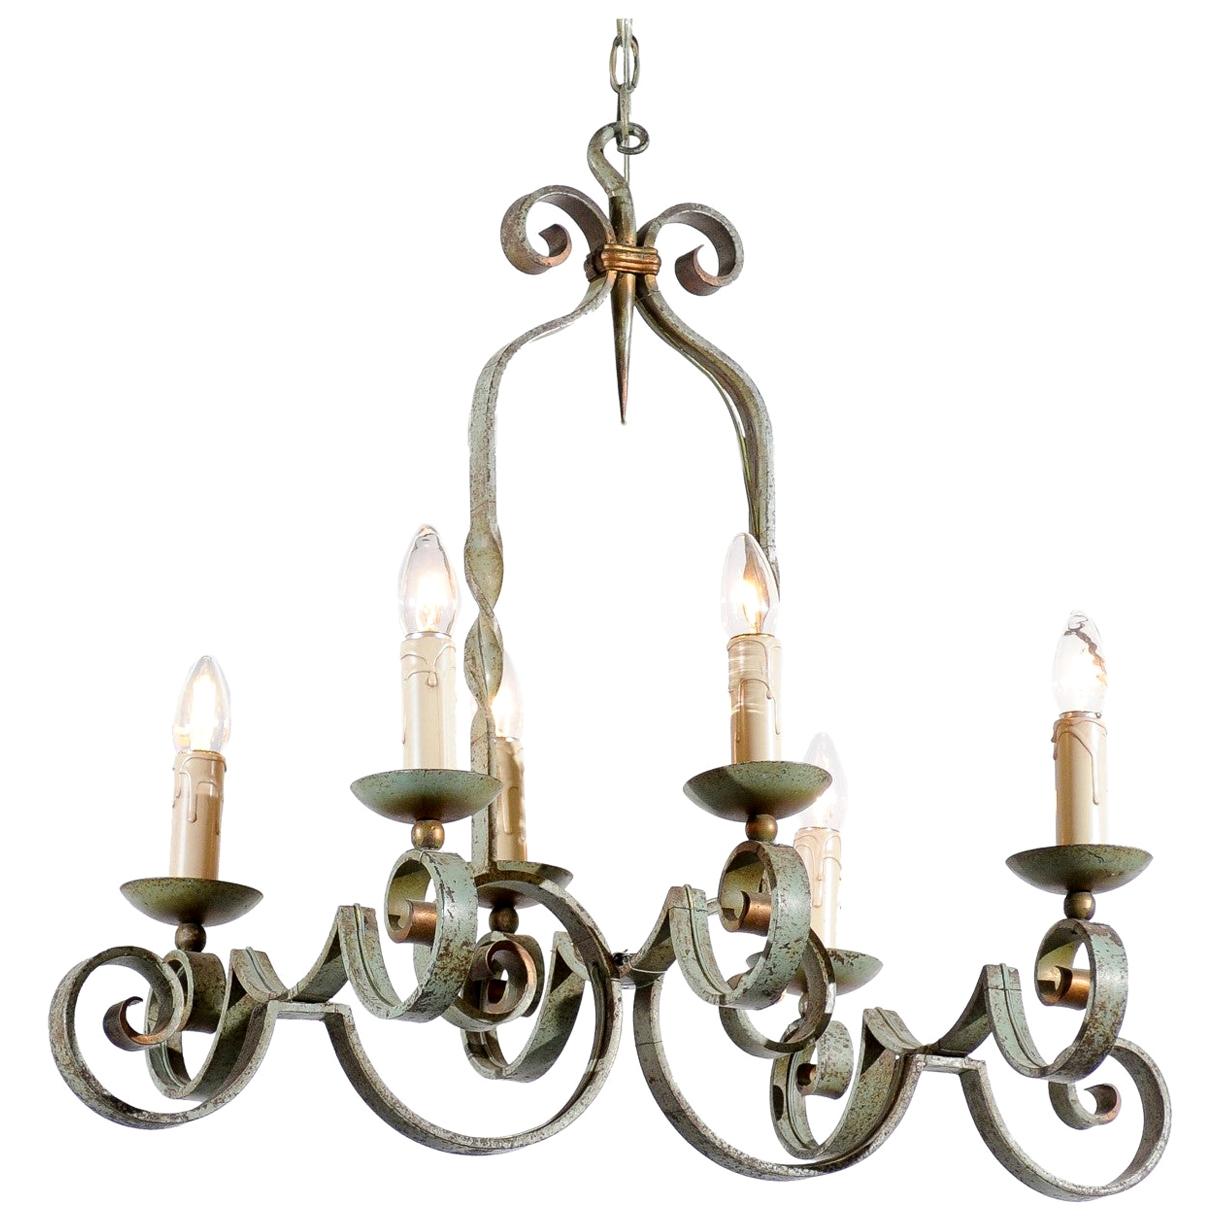 French 19th century Painted Iron Six-Light Chandelier with Scrolling Arms